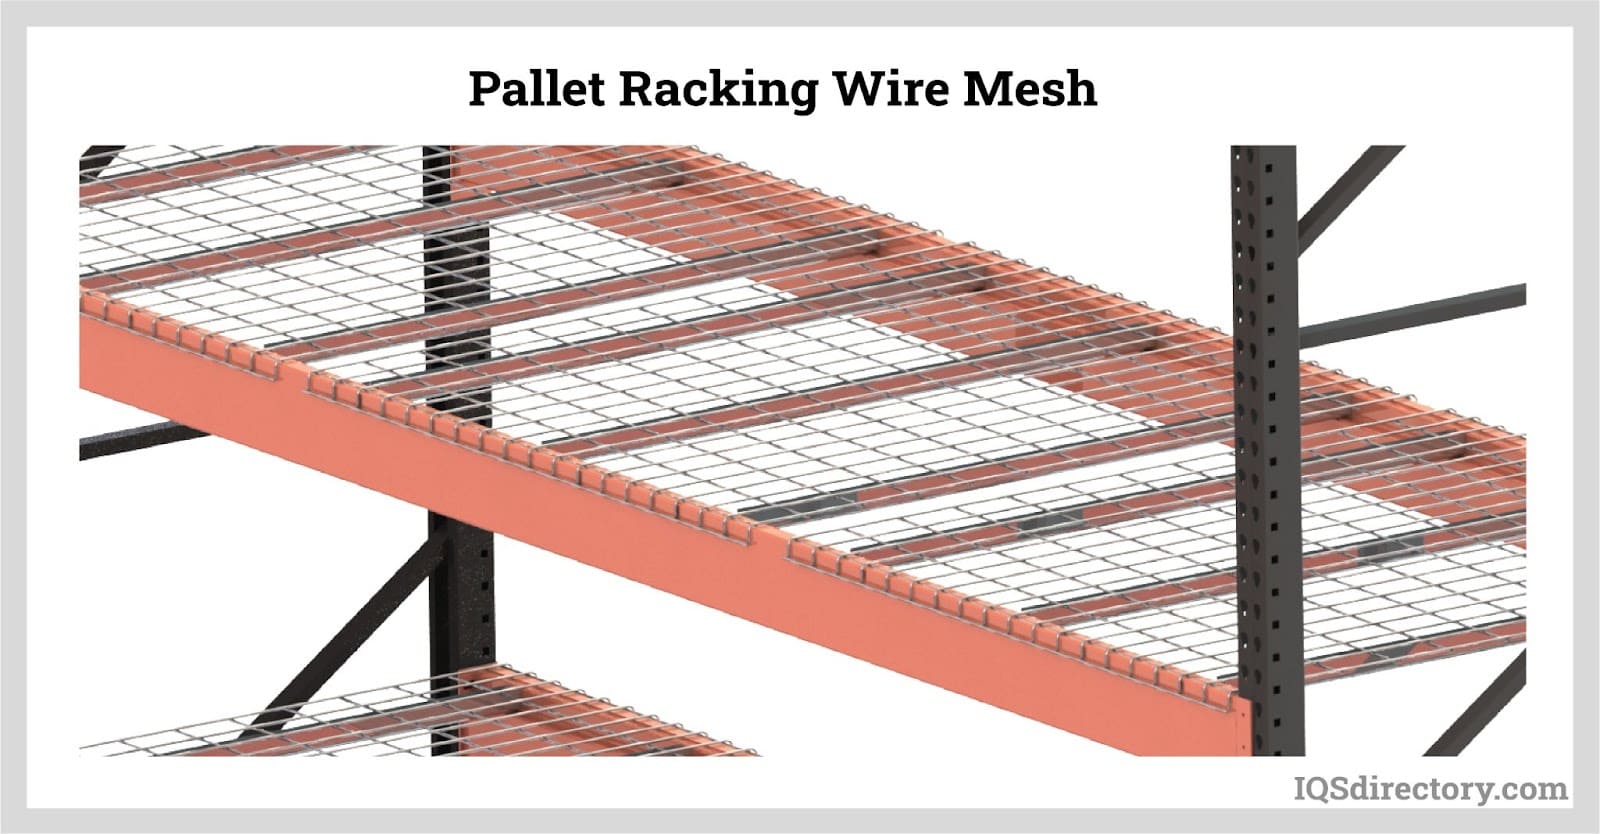 Pallet Racking Wire Mesh